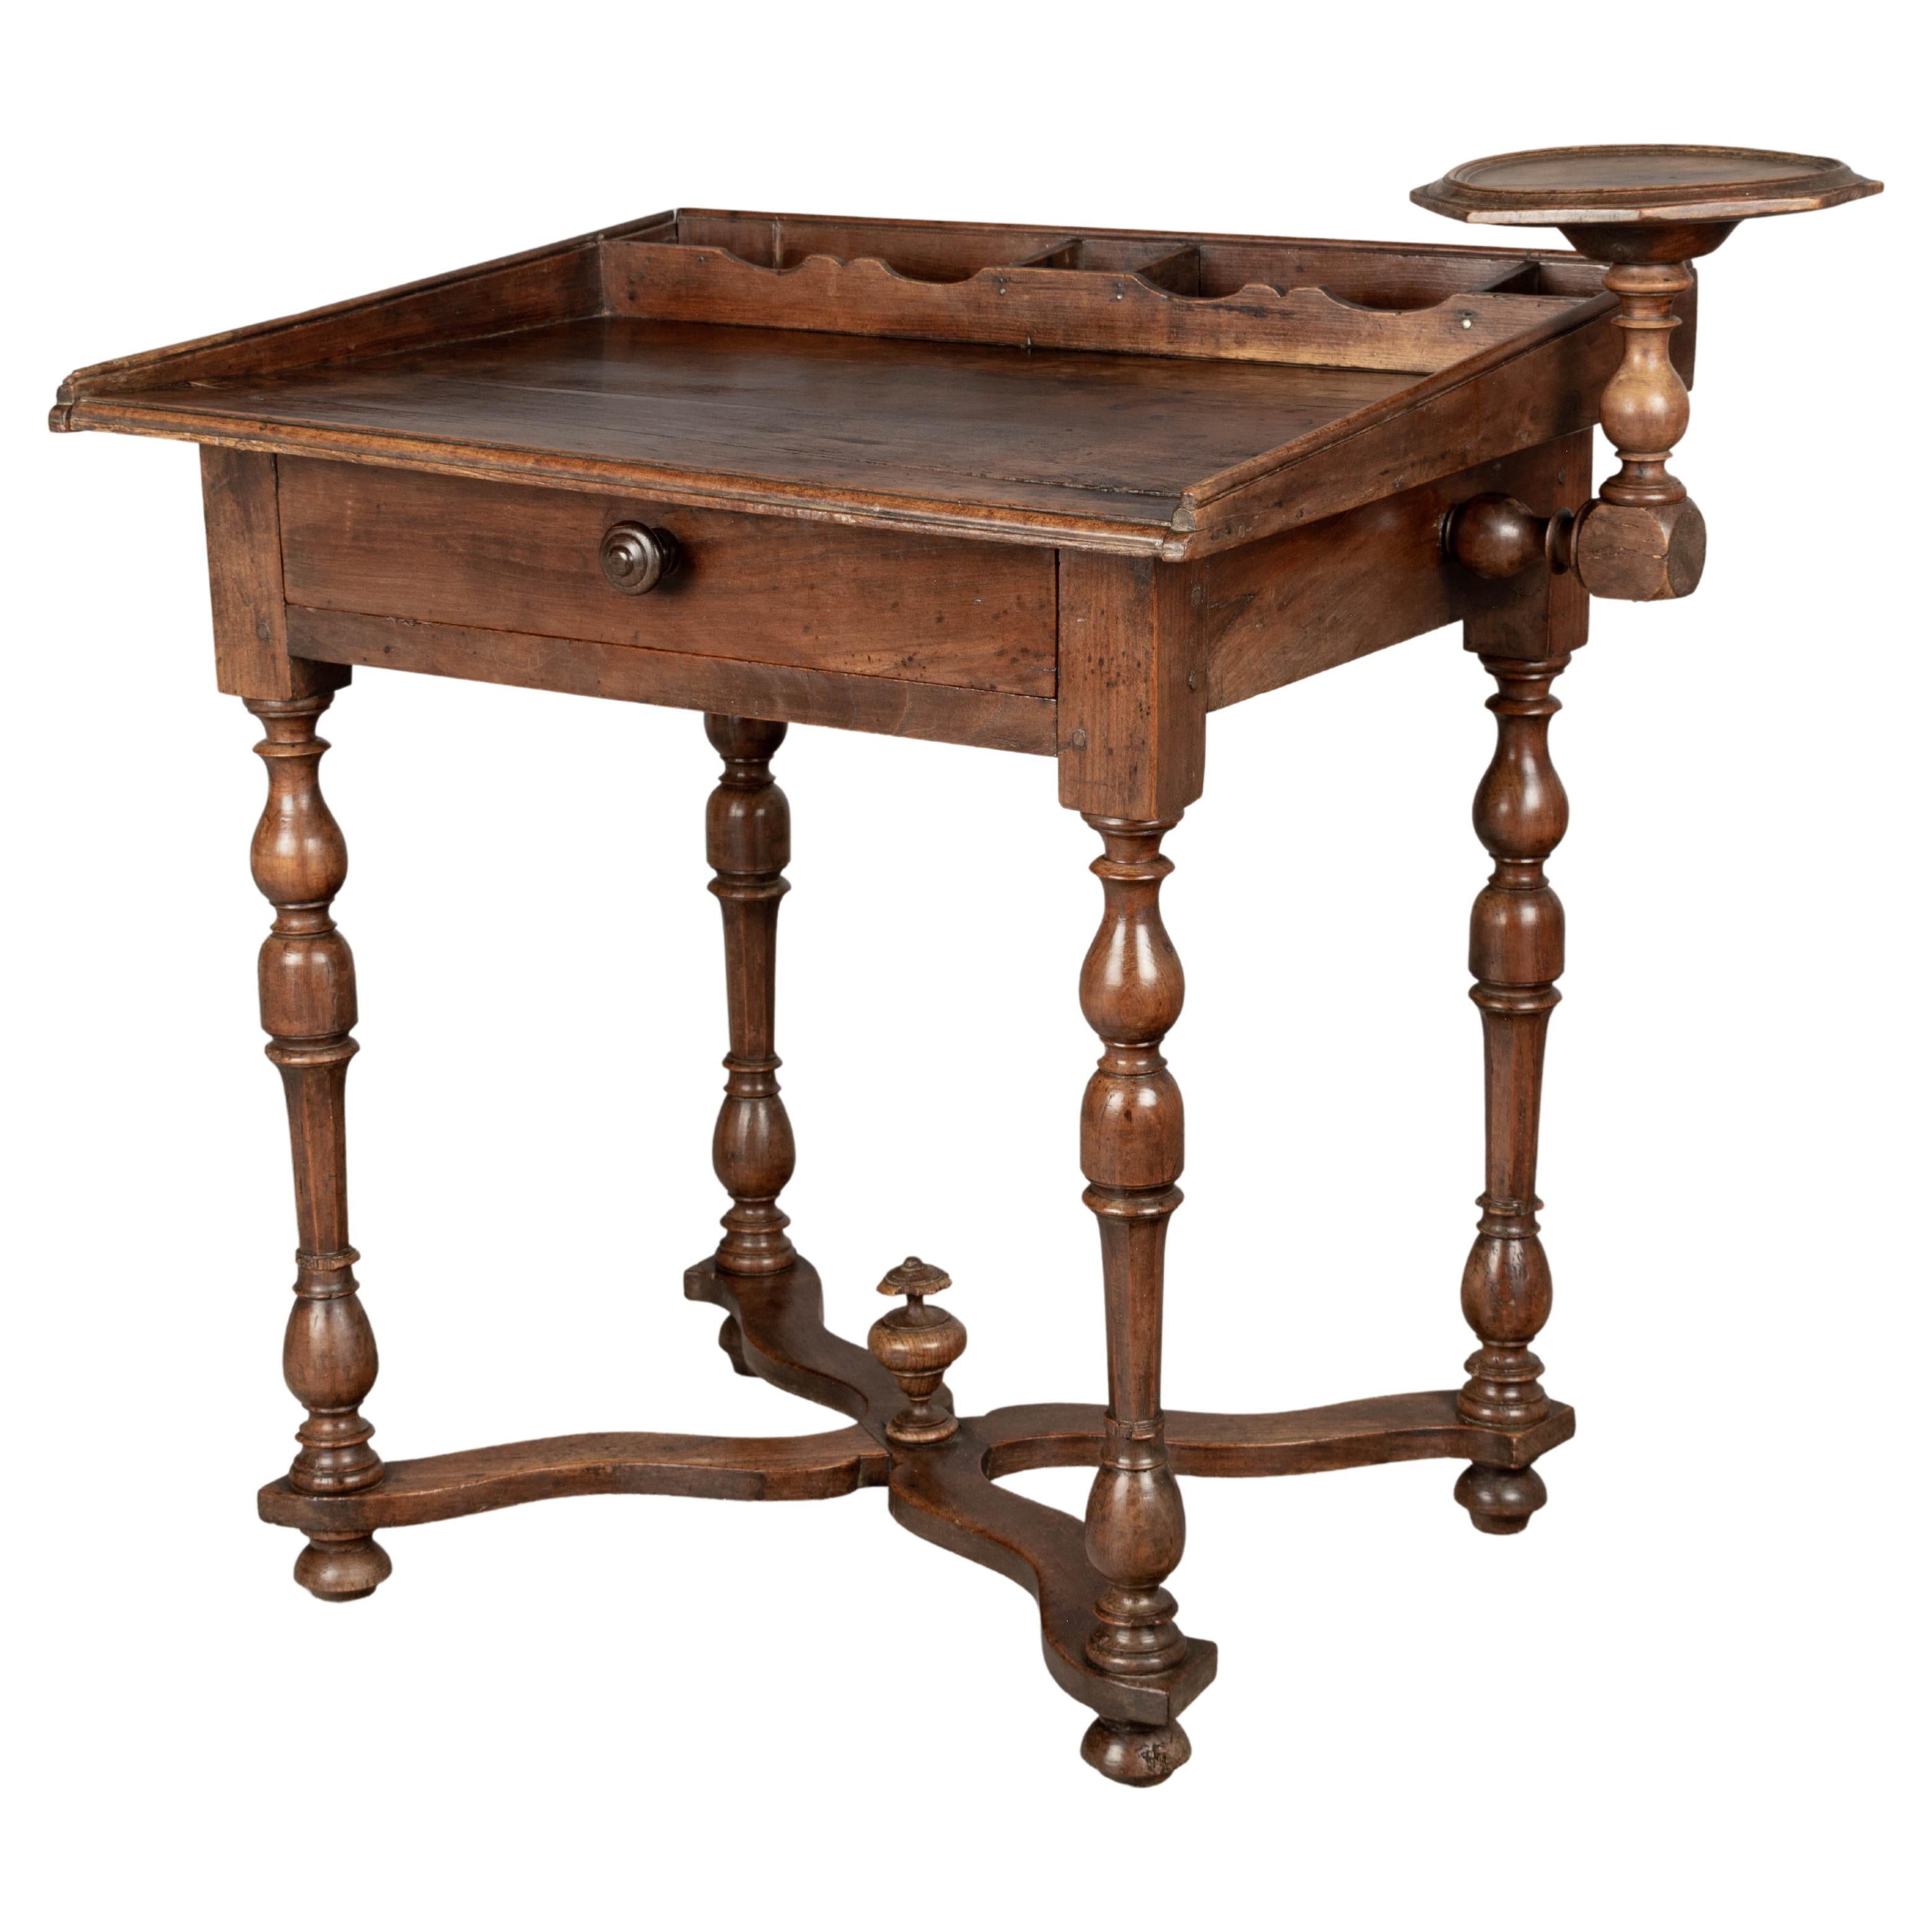 A late 18th century Country French child size desk, made of solid cherry. Beautifully crafted with turned legs and carved stretcher with center finial. Candle stand on the right, attached with turned peg. Missing the candle stand on the left.